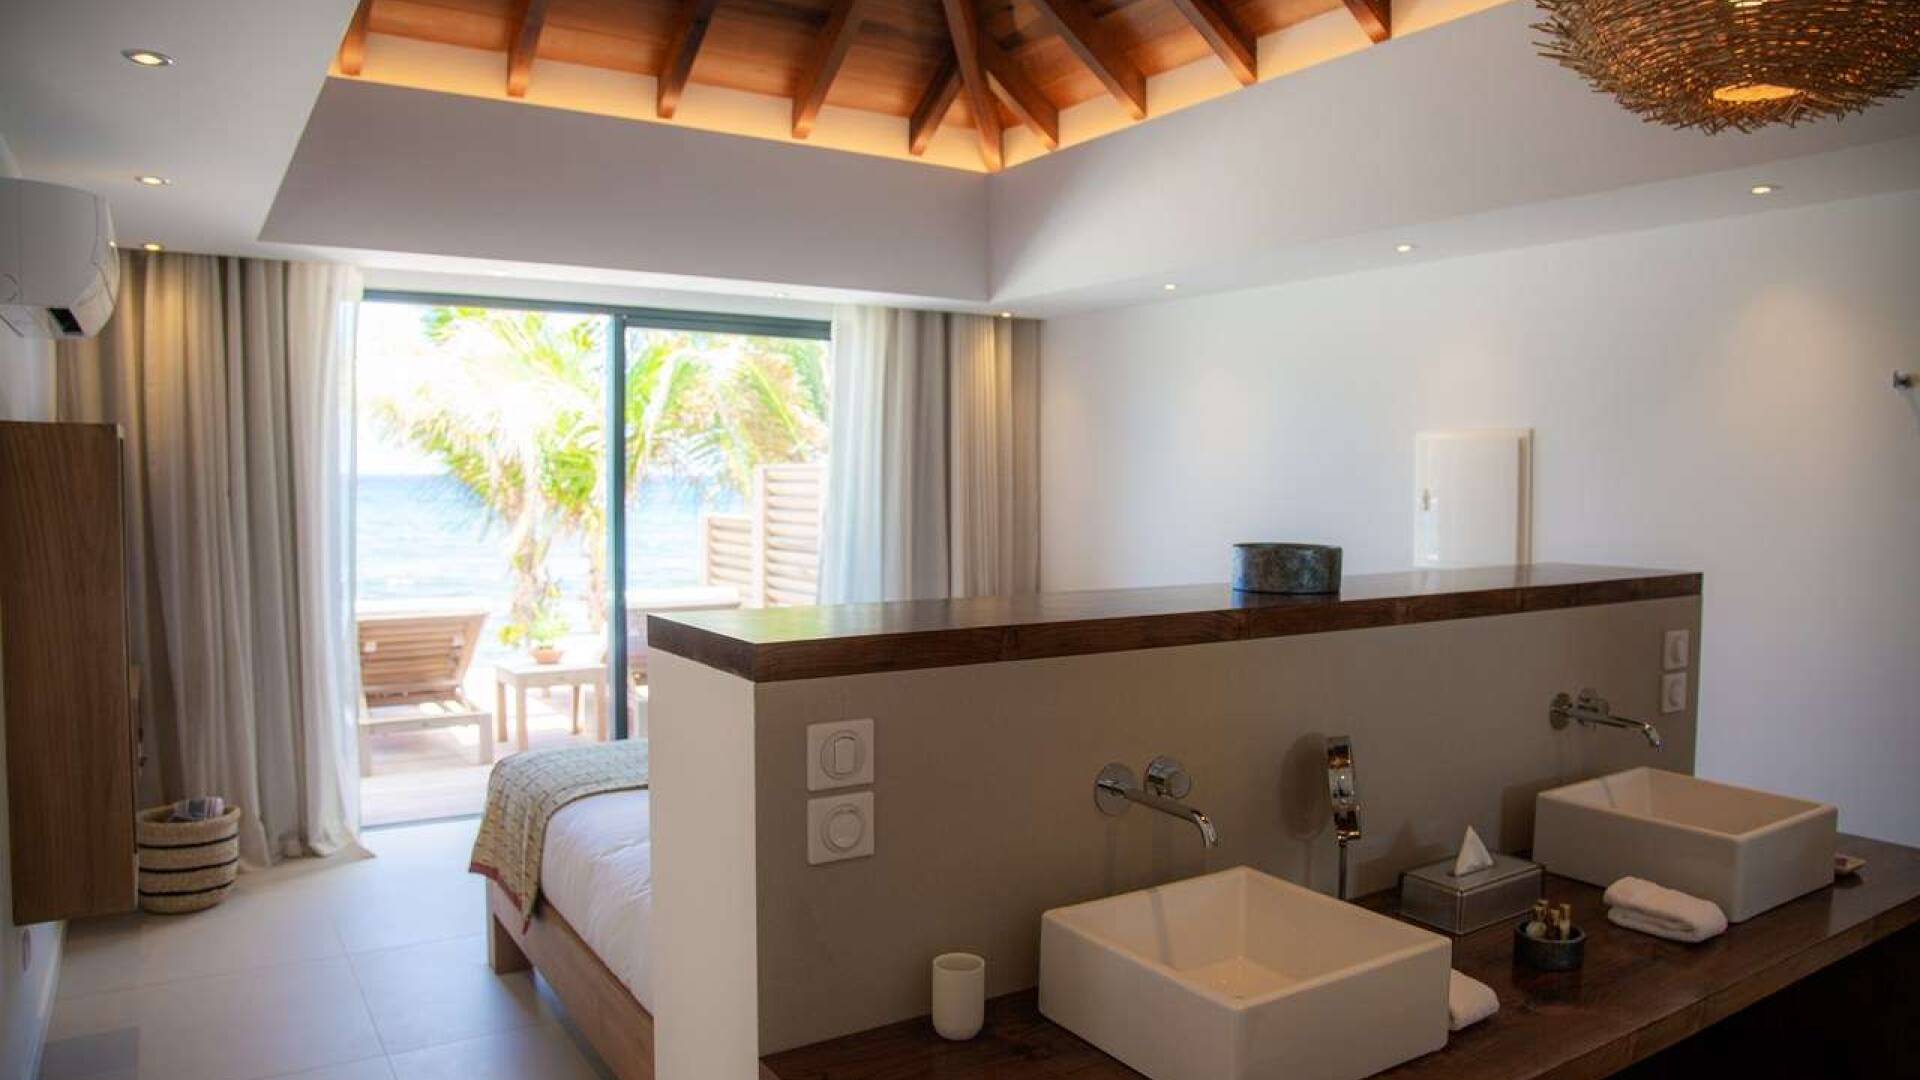 Bathroom at WV ACF, Anse des Cayes, St. Barthelemy